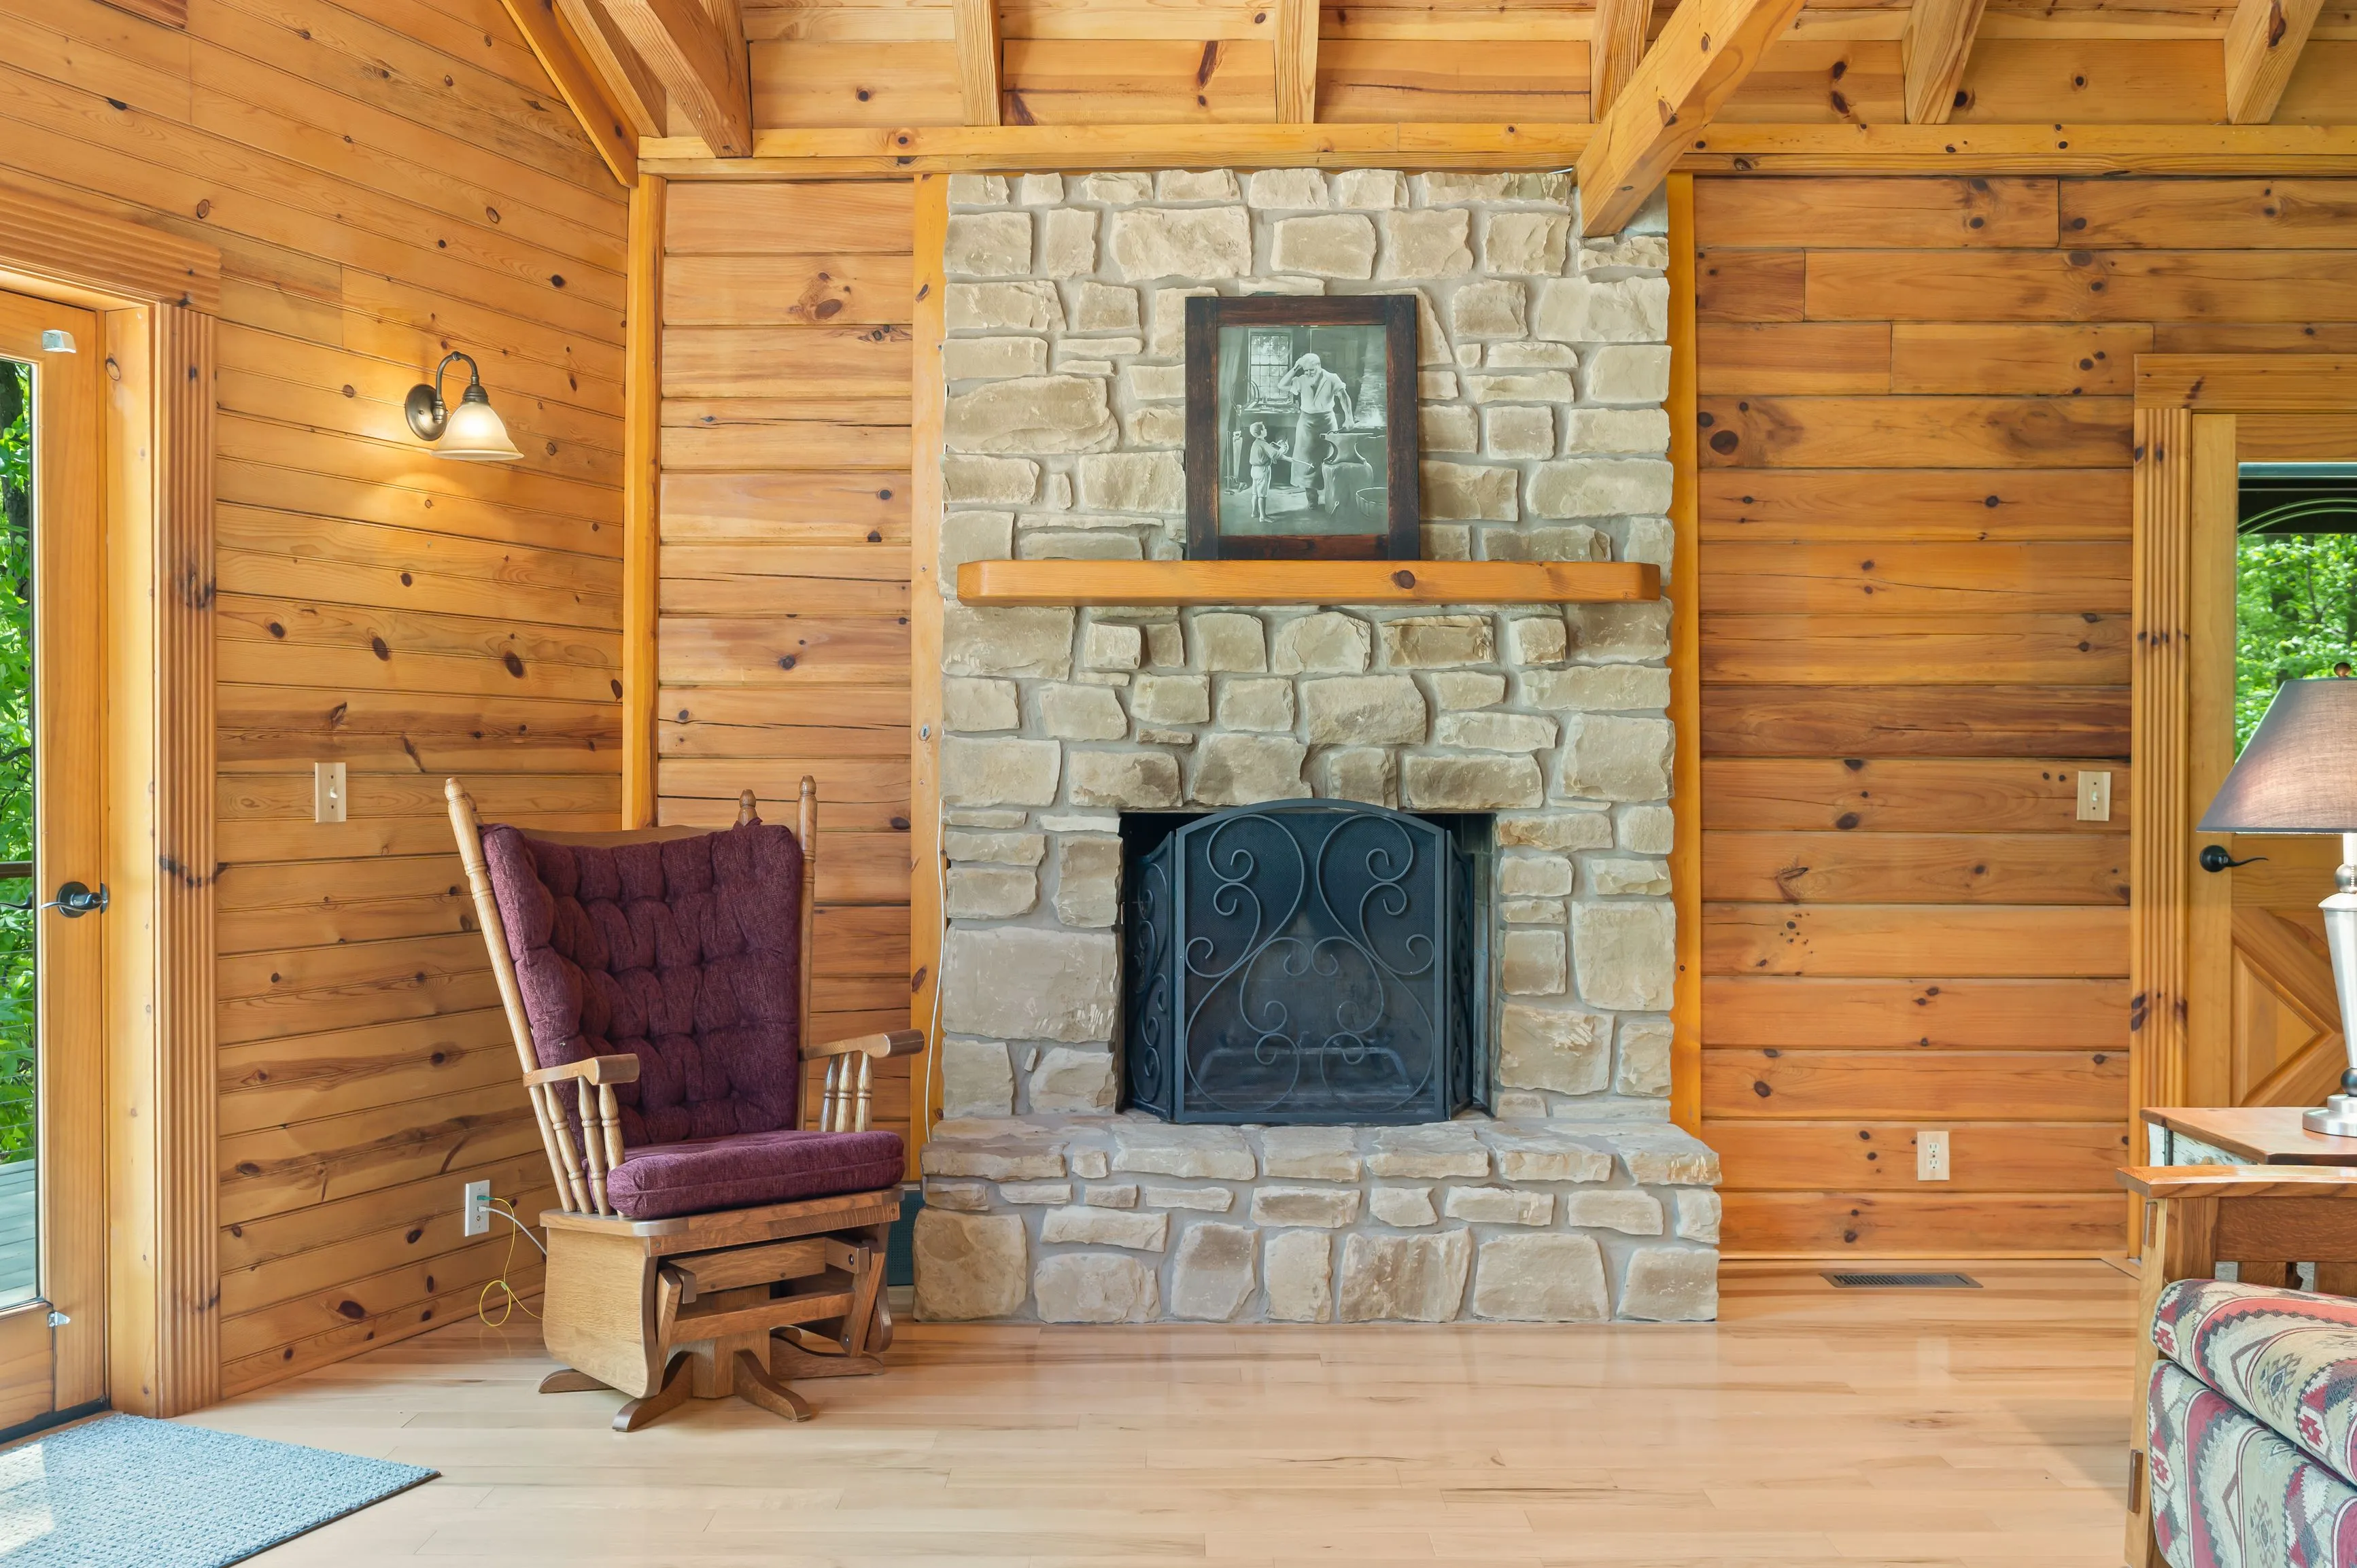 Cozy cabin interior with wooden walls and beams, a stone fireplace, and a vintage armchair.